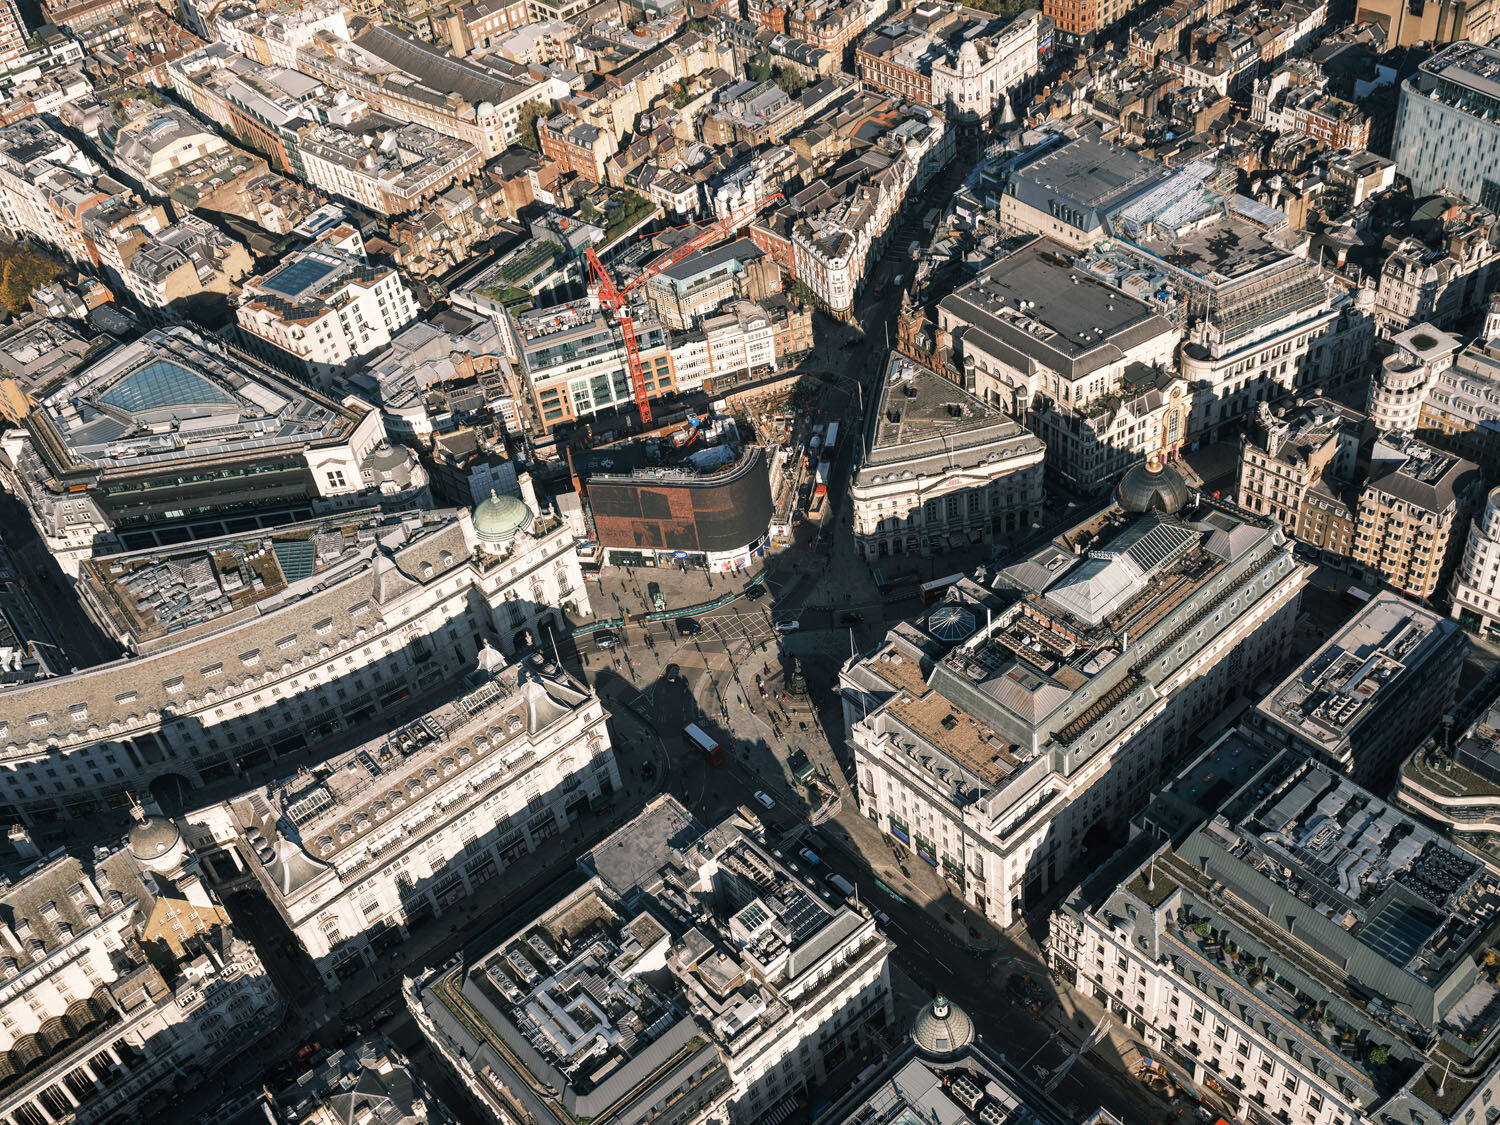  London Aerial View - Piccadilly Circus and surroundings. 